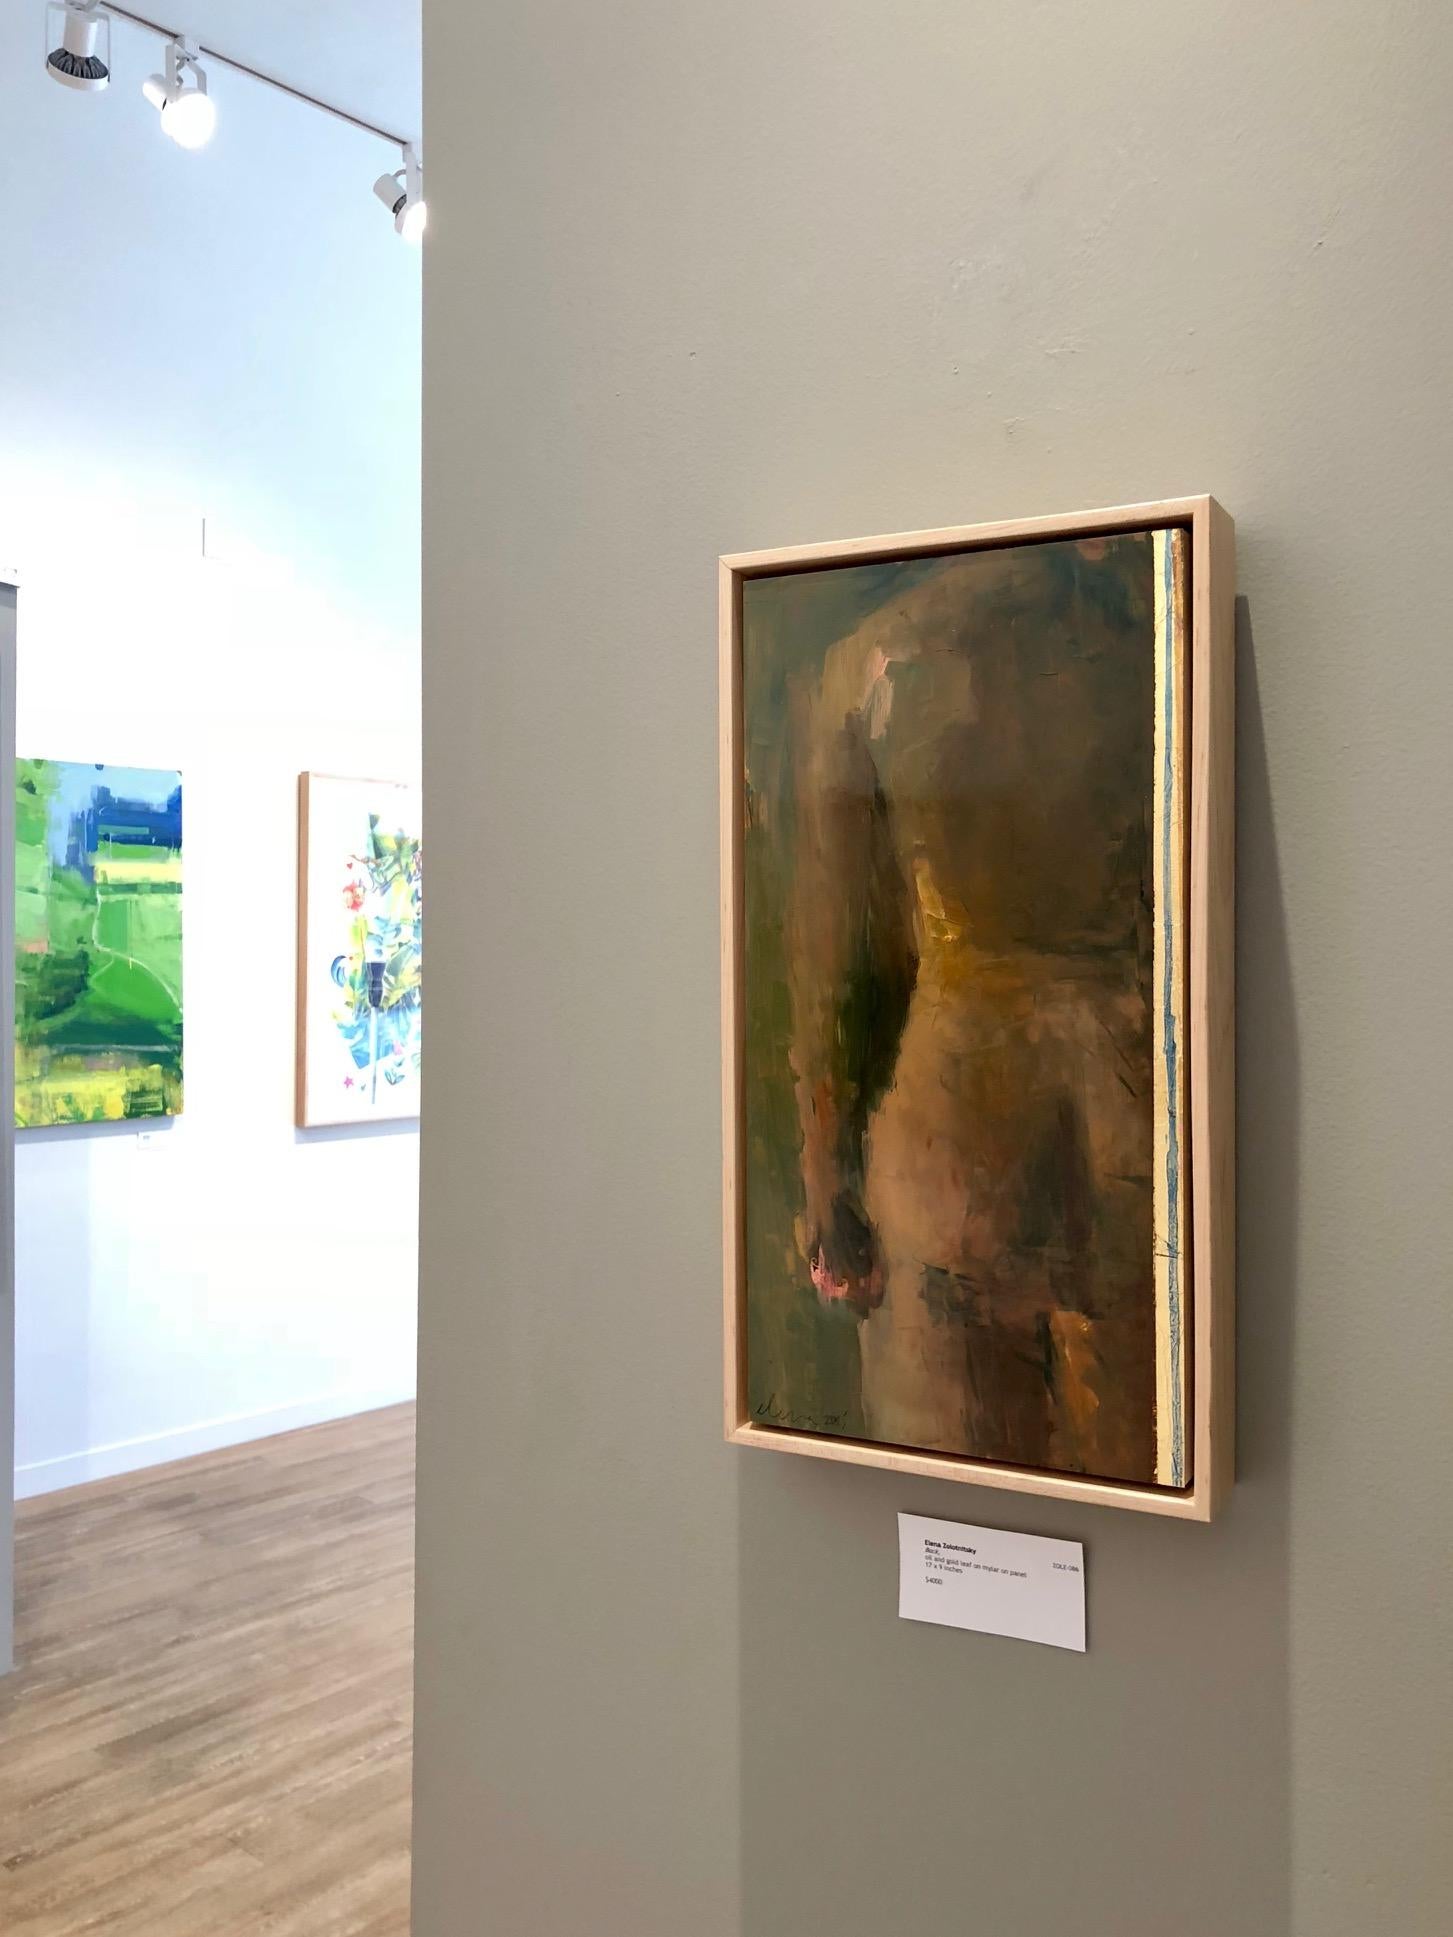 Female figurative back in oil with 22 karat gold on mylar mounted to wood and framed in maple. A sophisticated nude in muted green, gold, and pink. The painting is 17 x 8 3/4 inches. Framed in clear maple, it is 18 x 9 3/4 inches. A truly elegant